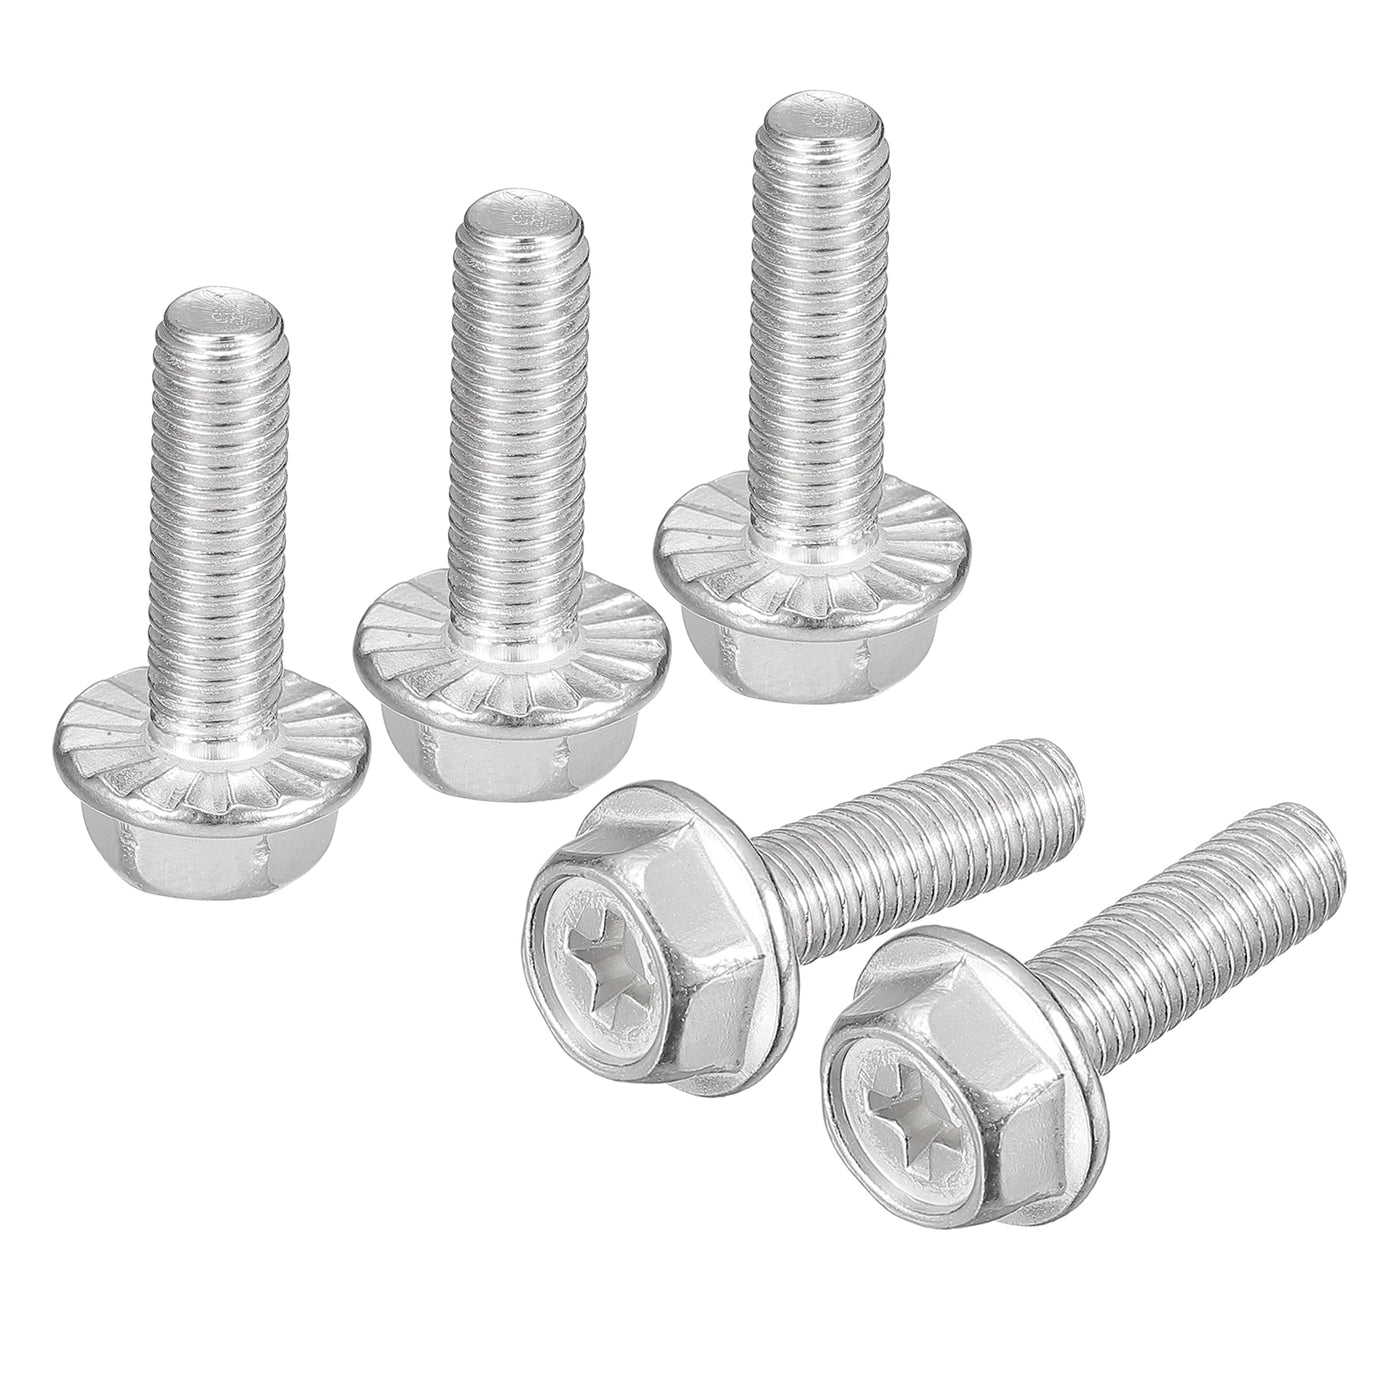 uxcell Uxcell M6x20mm Phillips Hex Head Flange Bolts, 10pcs 304 Stainless Steel Screws